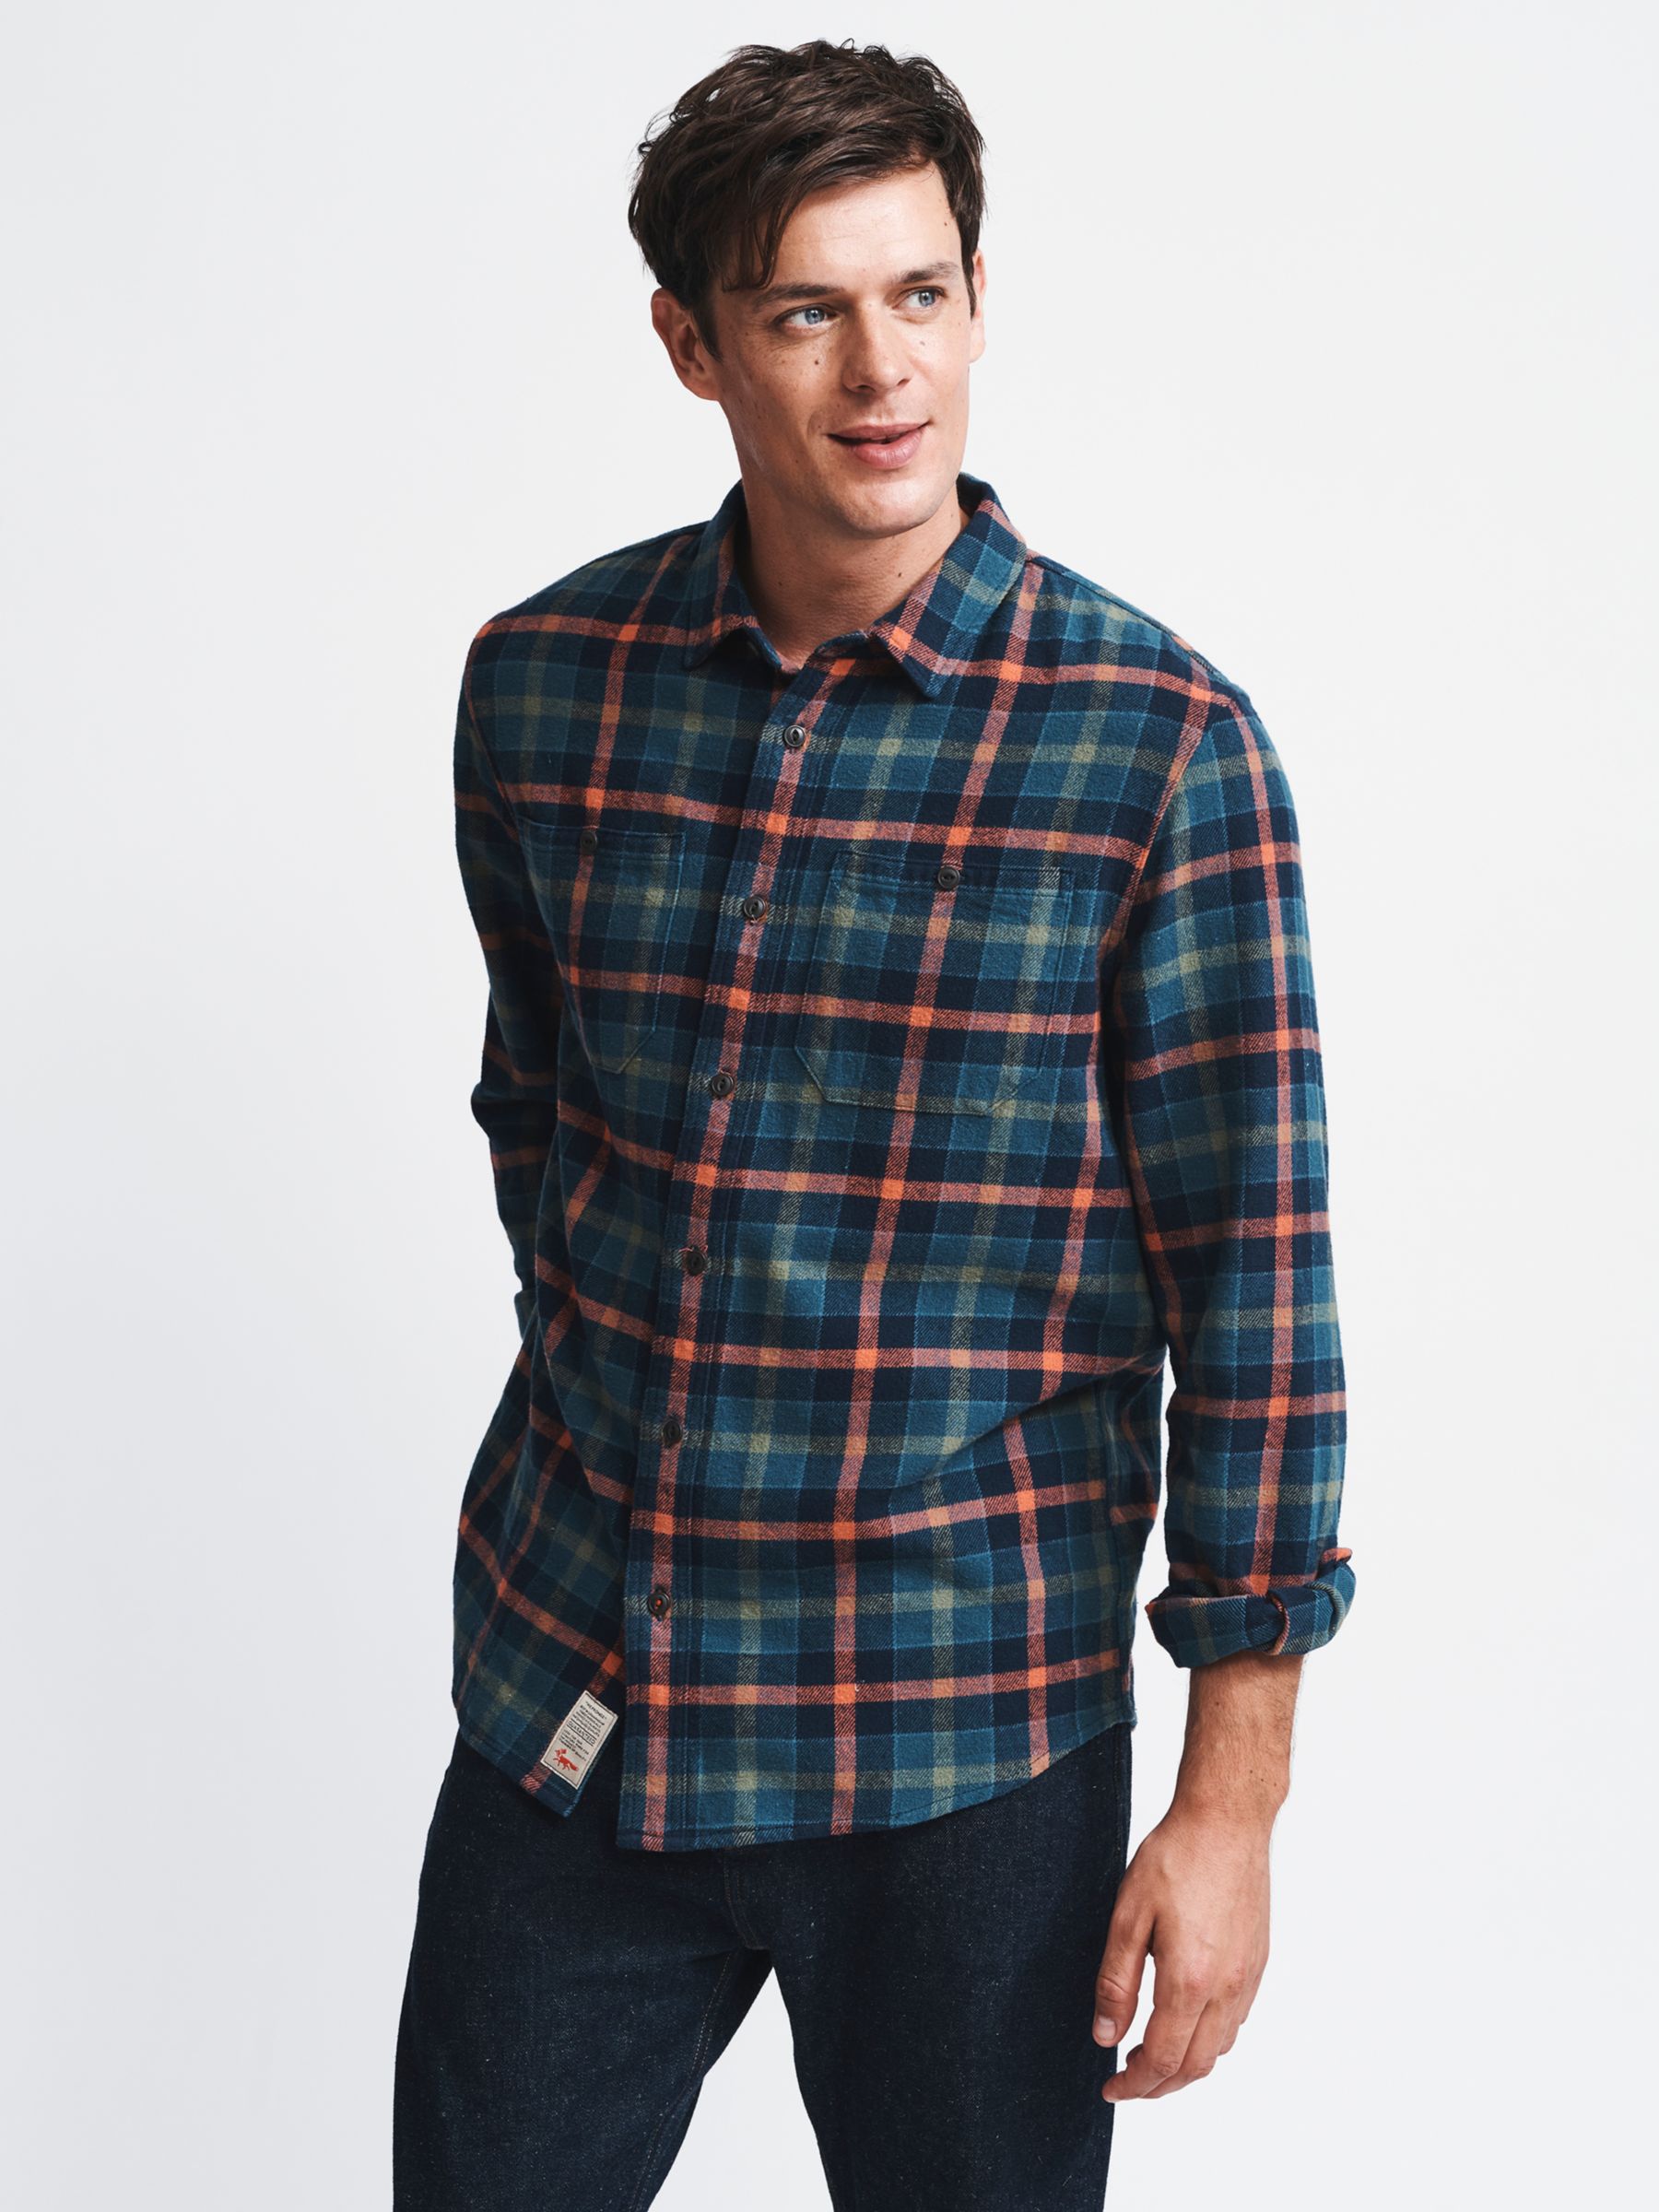 flannel shirts online Hot Sale - OFF 53%